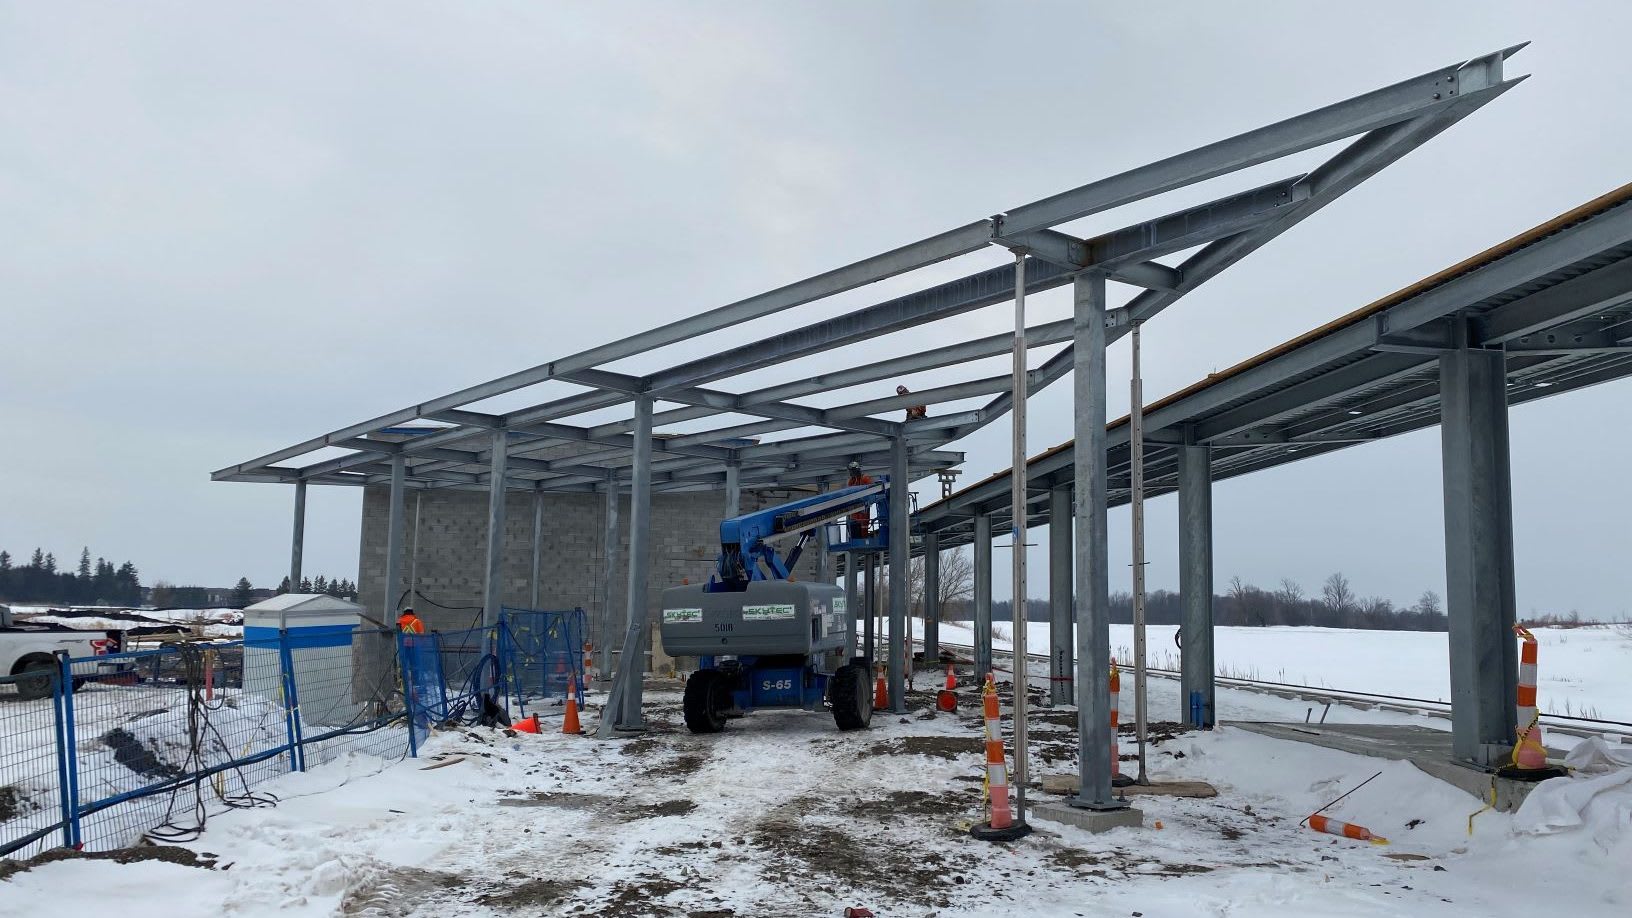 Structural steel for the entrance canopy is installed at Old Elm GO Station